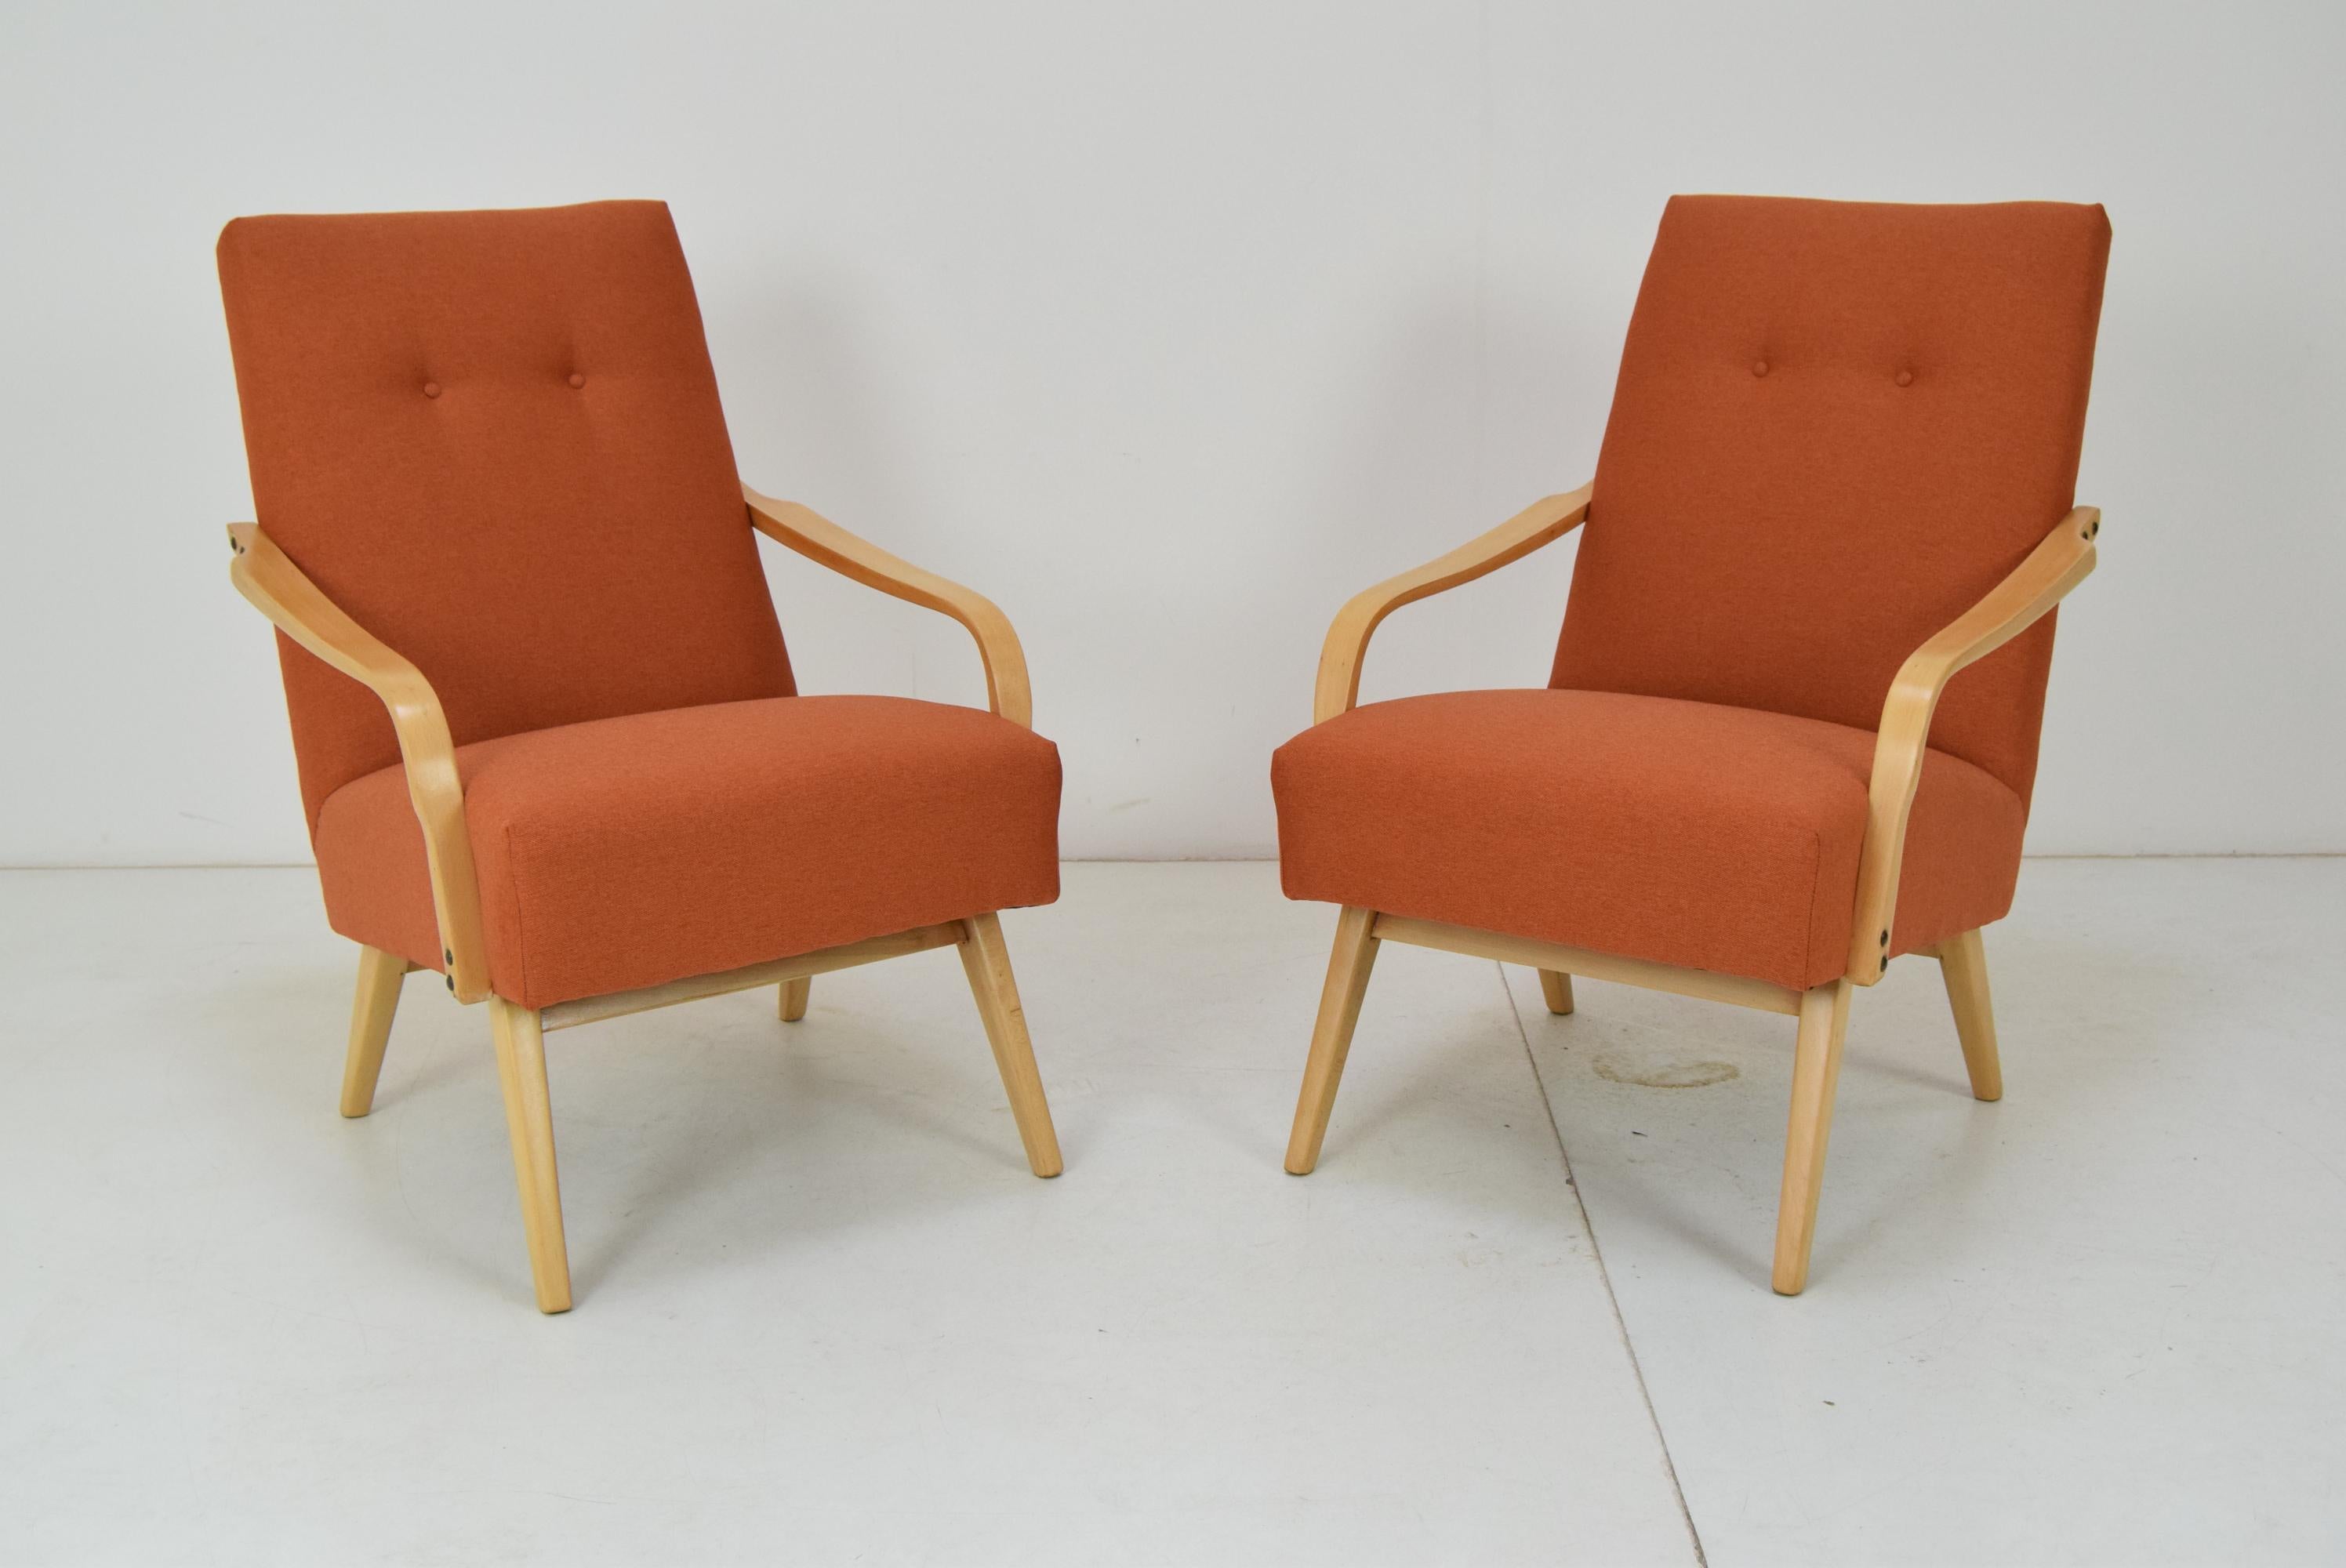 Made in Czechoslovakia 
Made of wood and fabric
Re-upholstered
Restored
Good condition.